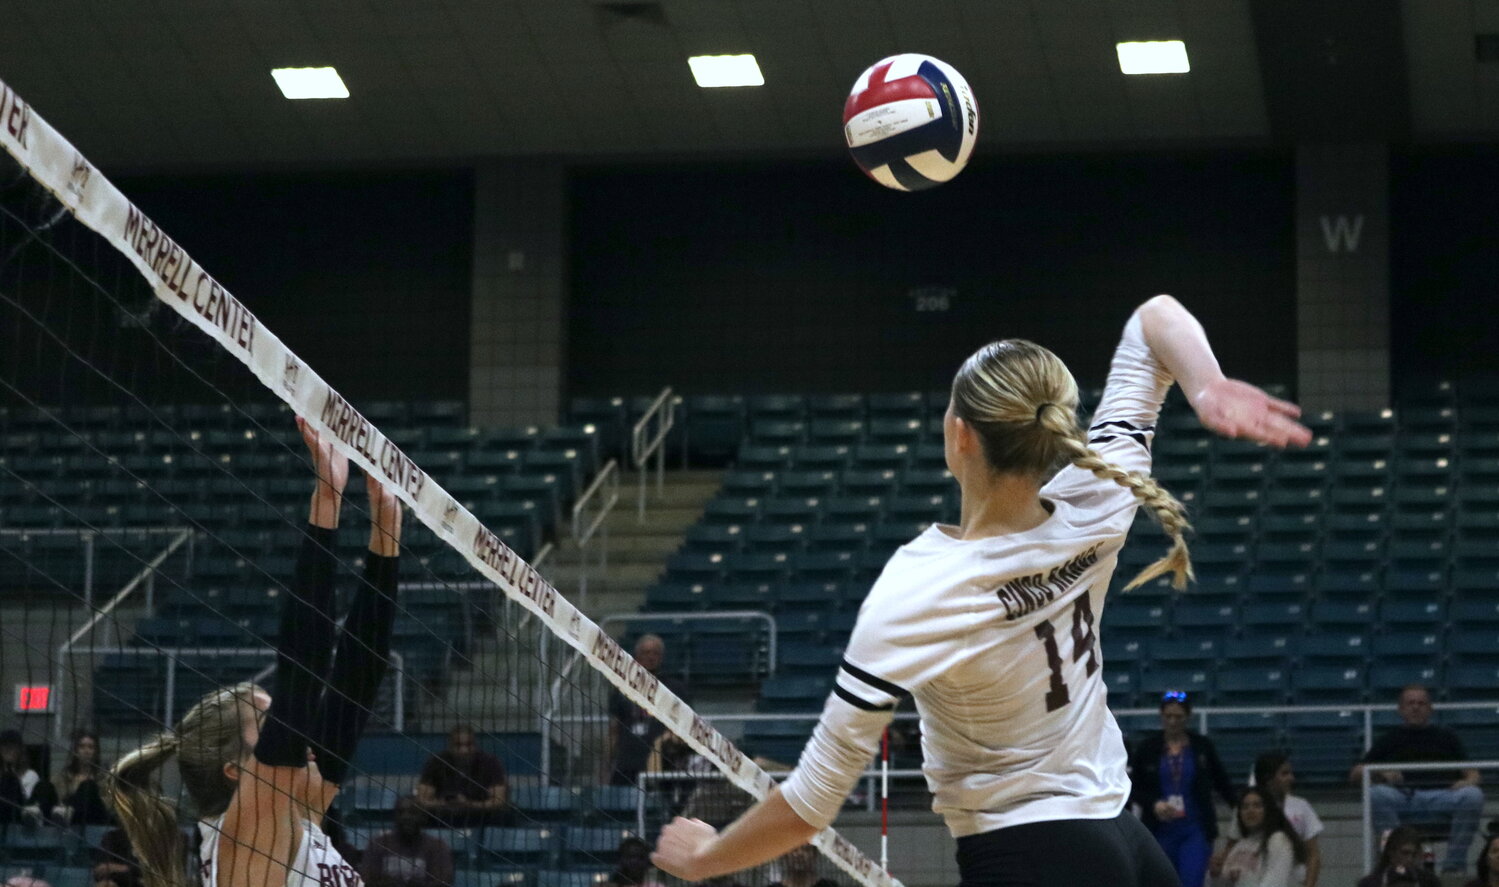 Emily Killam spikes the ball during Tuesday’s match between Cinco Ranch and Cy-Fair at the Merrell Center.